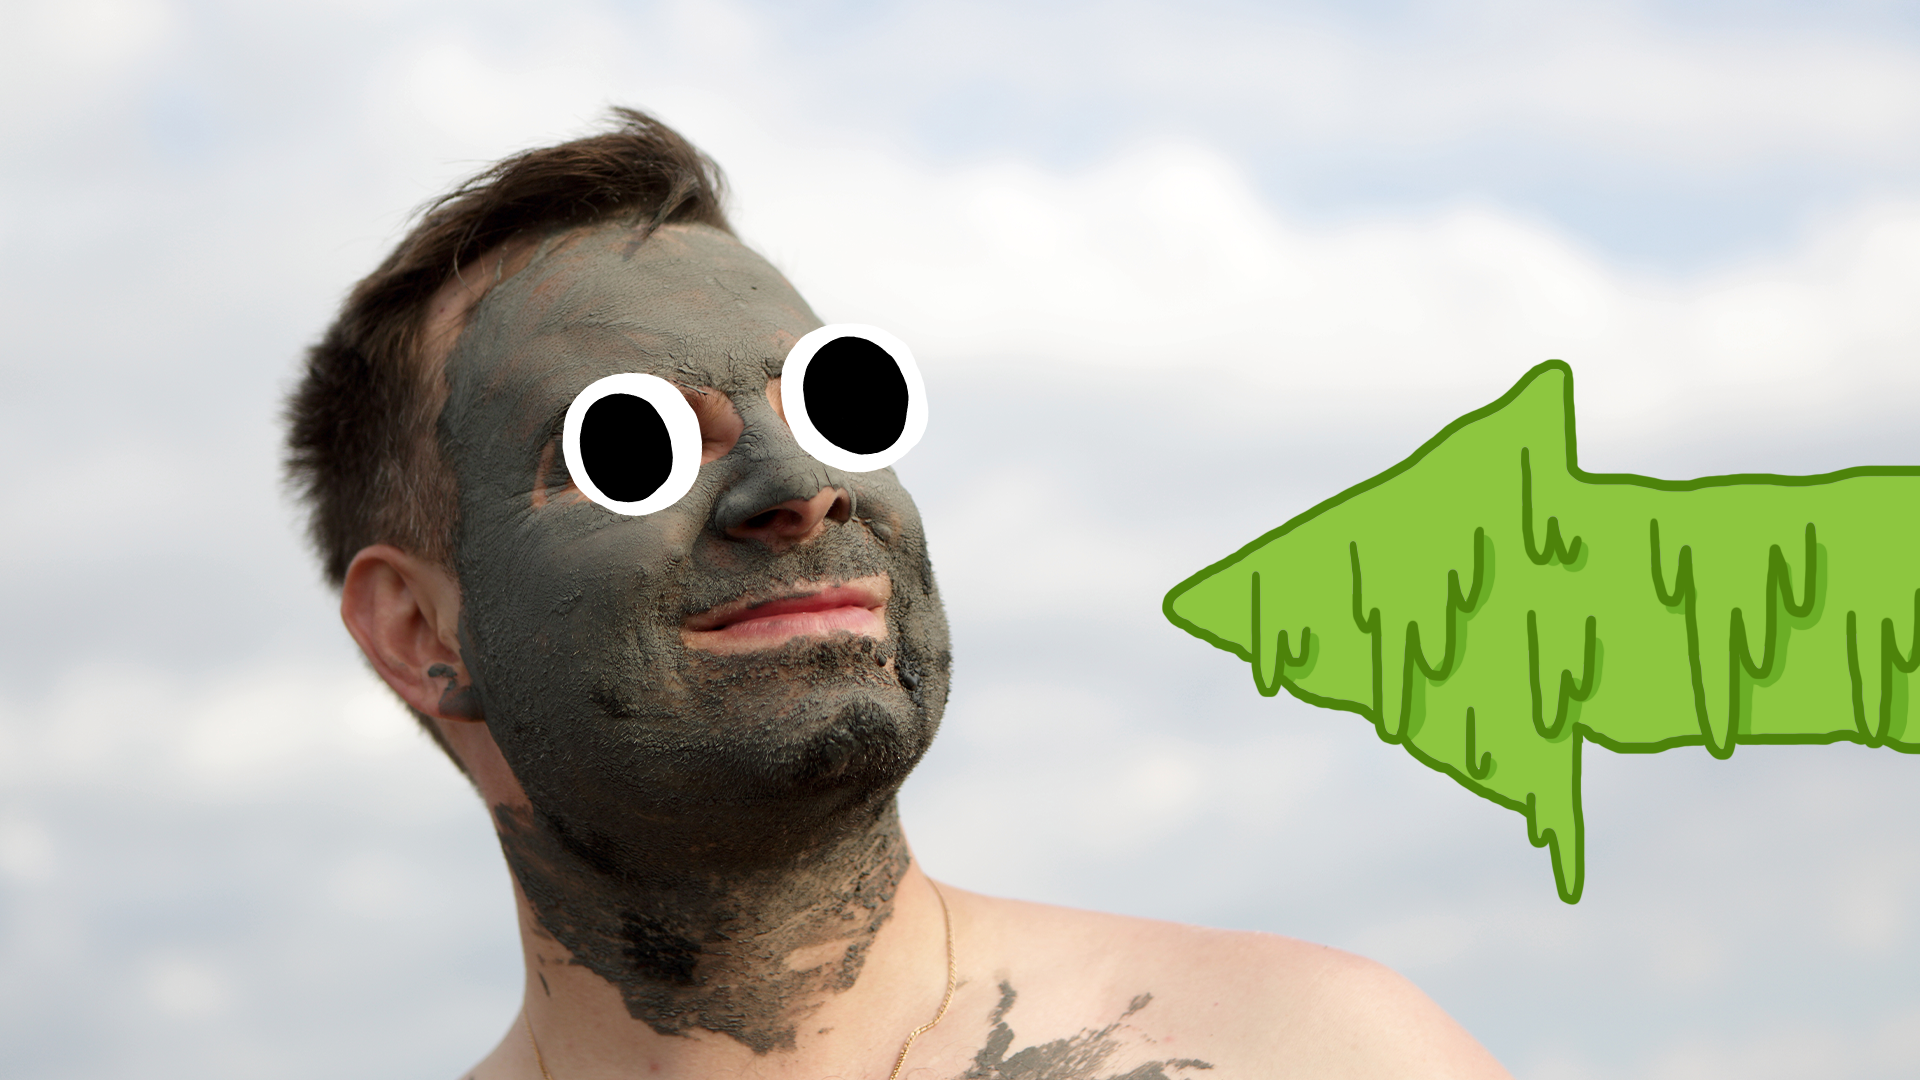 Man with mud on his face and green slimy arrow